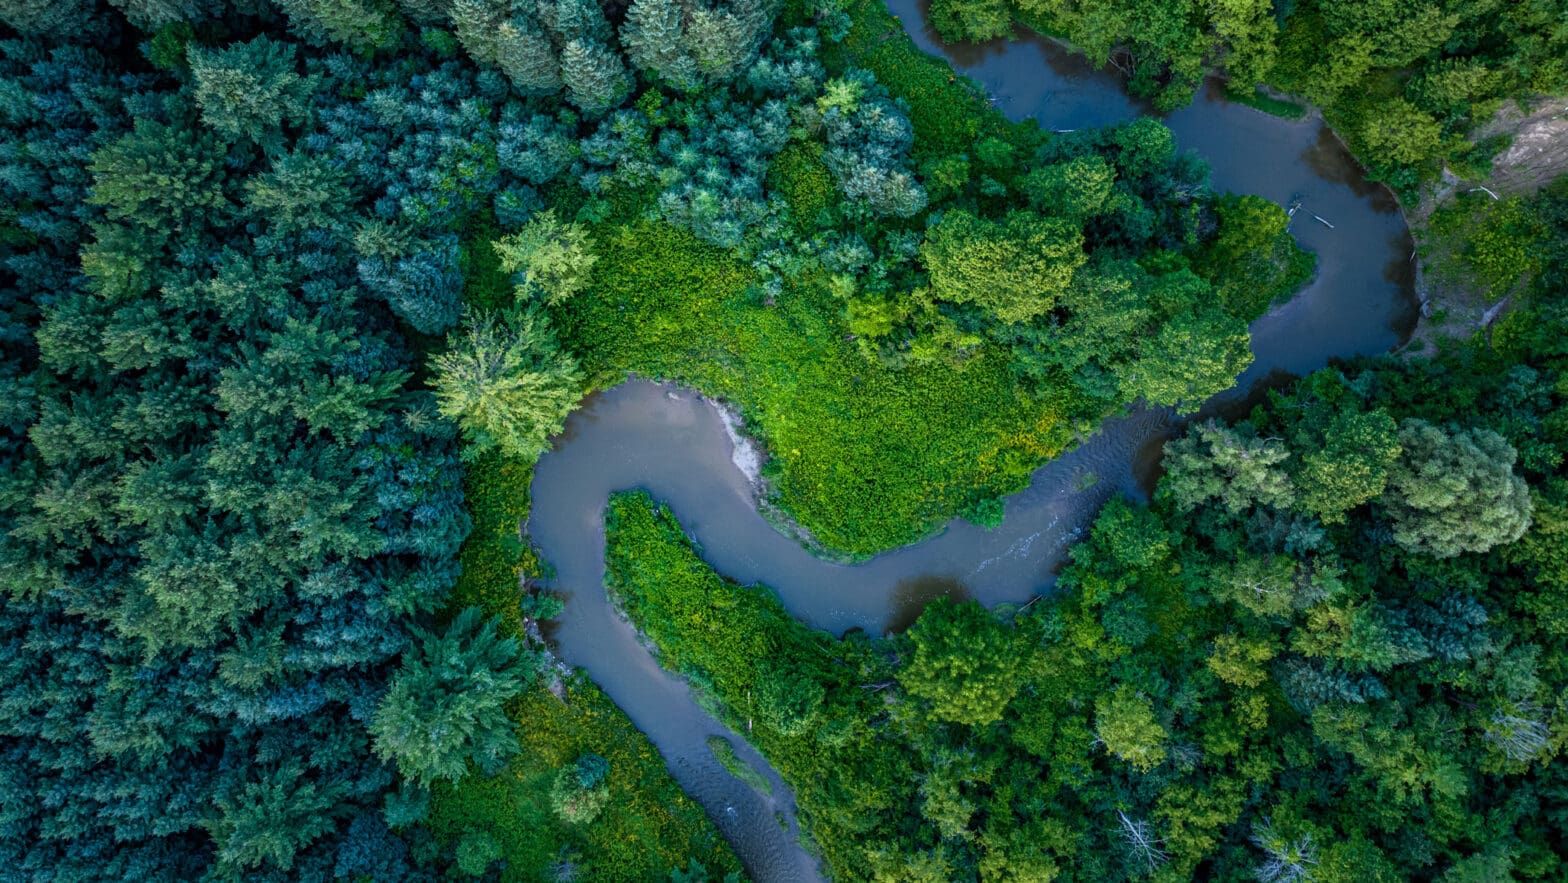 Aerial view of a meandering river surrounded by forest.